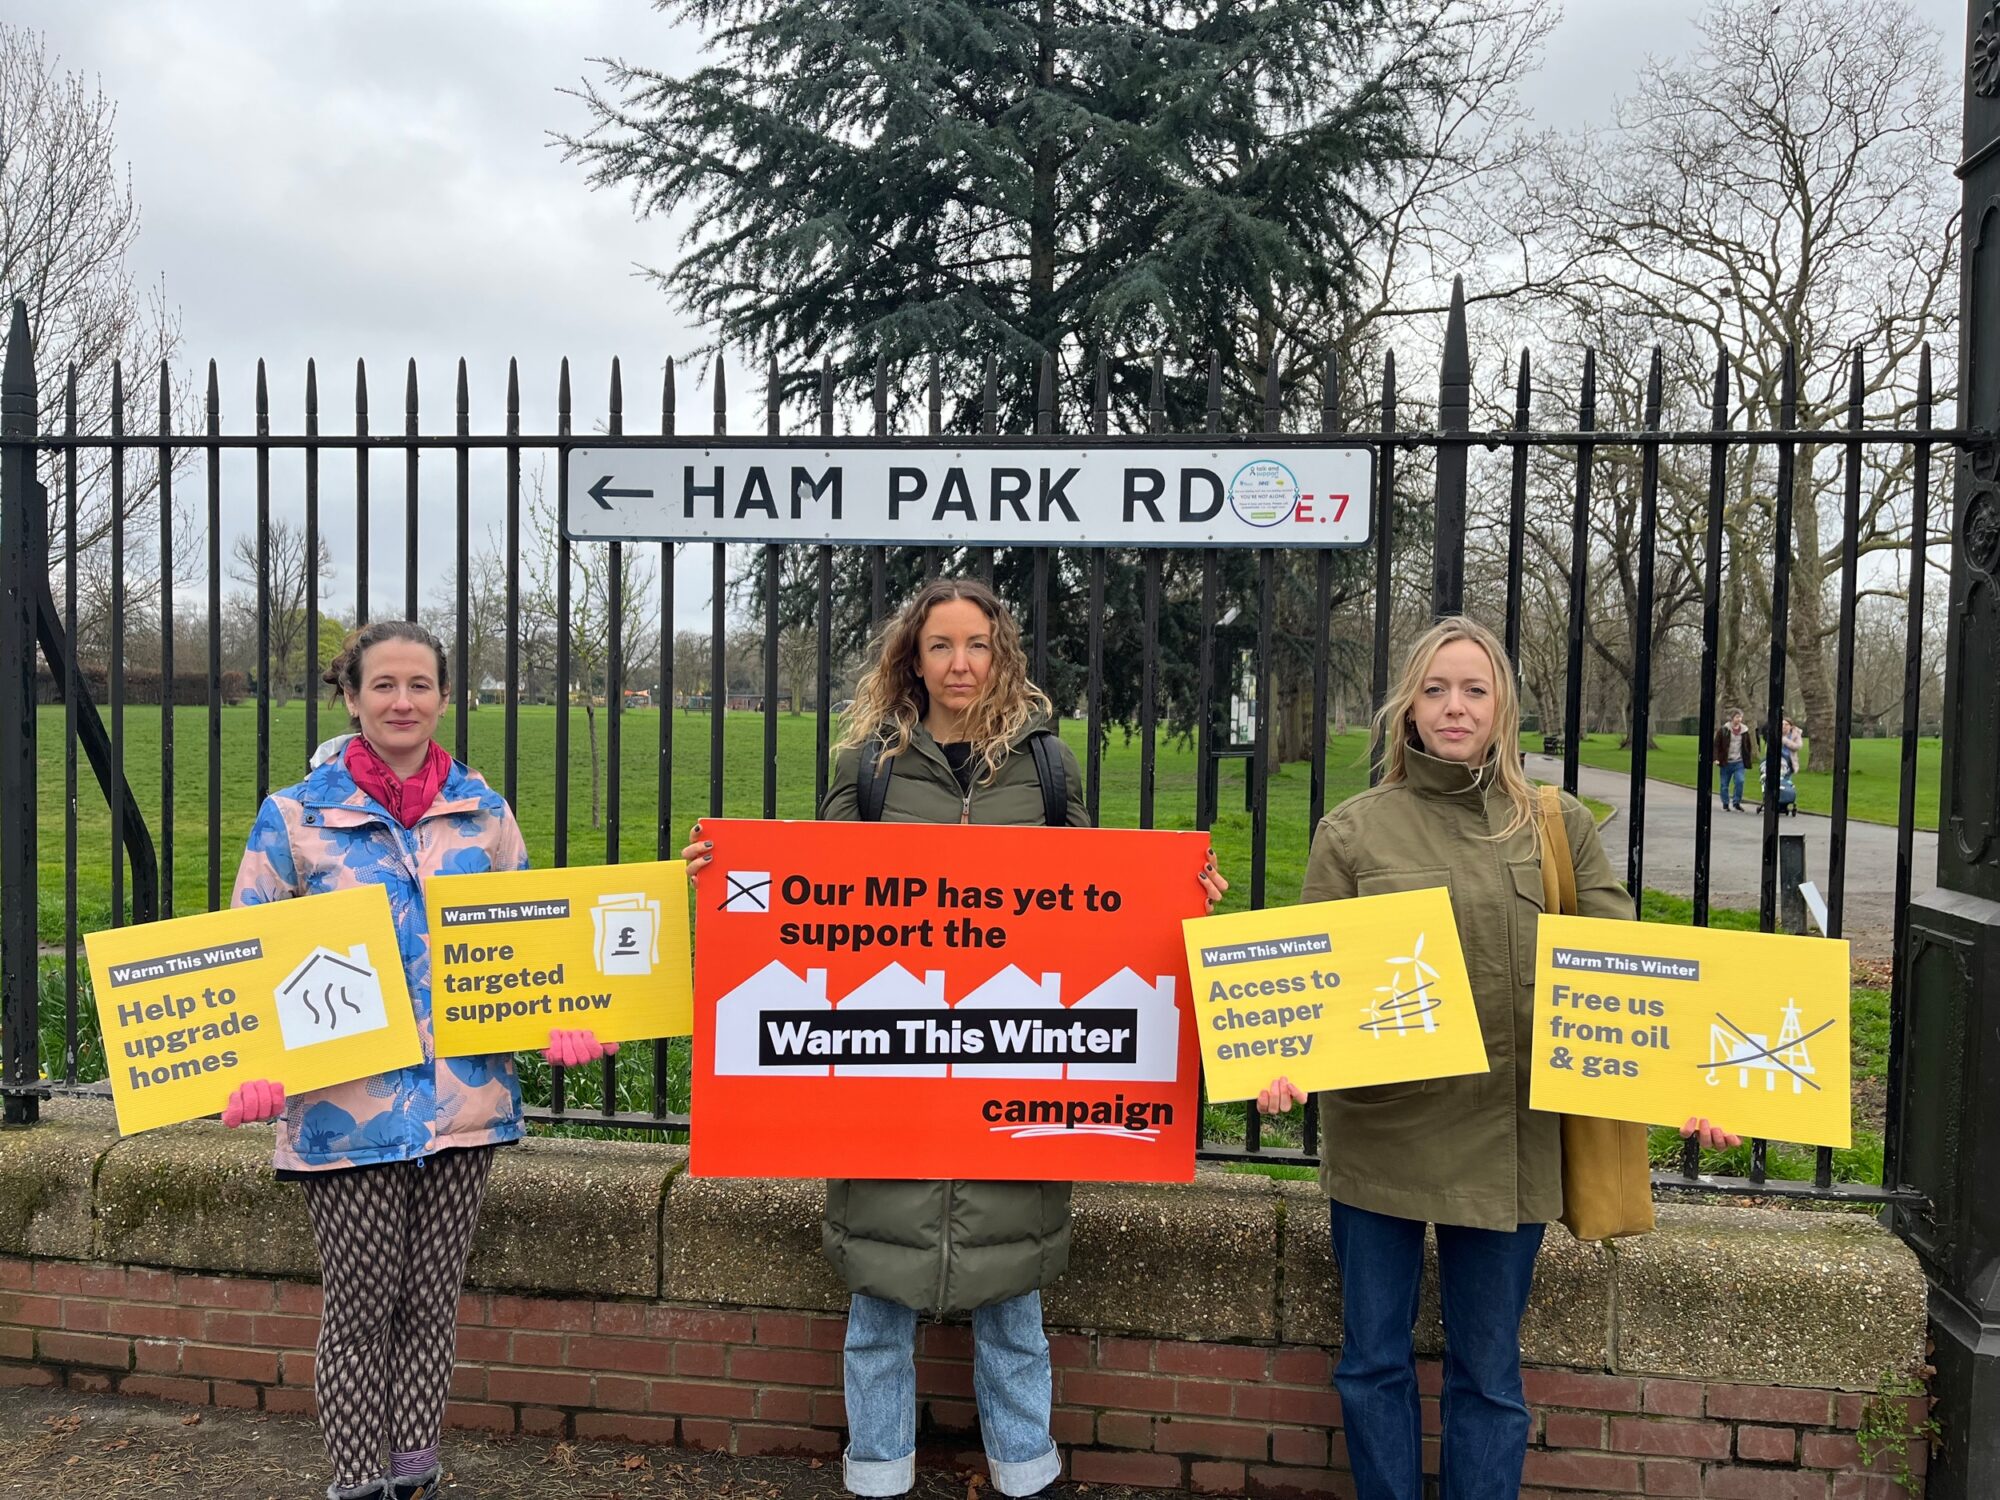 Three women stand in front of a park fence, on which is a road sign reading "Ham Park Rd, E7". They are dressed in warm coats and holding signs, small ones in yellow on the side and a larger red one in the middle. The yellow signs say "Help to upgrade homes" and "More targeted support now" on one side and "Access to cheaper energy" and "Free us from oil and gas" on the other. The red sign in the middle reads "Our MP has yet to support the Warm This Winter campaign". All signs include stylised icons and graphics of houses, money, windfarms and oil and gas drilling